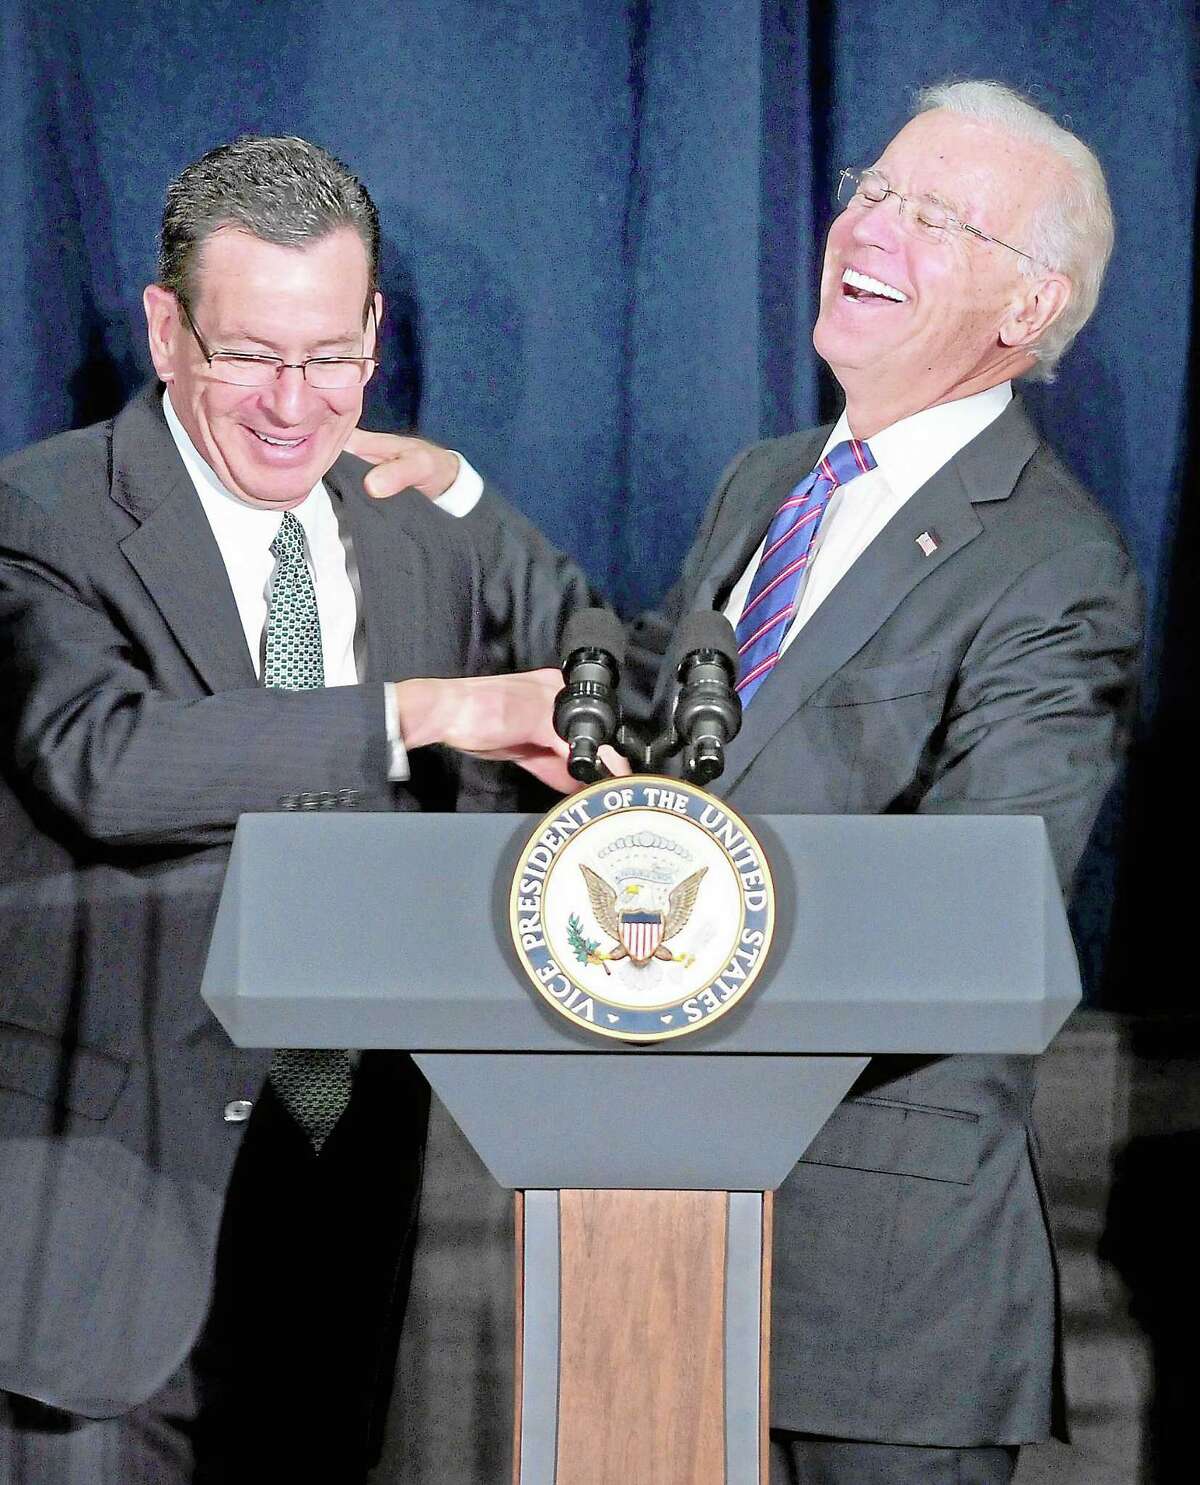 Gov. Dannel Malloy (left) jokes with Vice President Joe Biden (right) as he begins to speak at a Conference on Gun Violence at the Campus Center Ballroom at Western Connecticut State University in Danbury on 2/21/2013. Malloy told the audience that Biden would mention his grandfather during his speech and when he did the audience laughed at the prediction coming true. ¬ Photo by Arnold Gold/New Haven Register